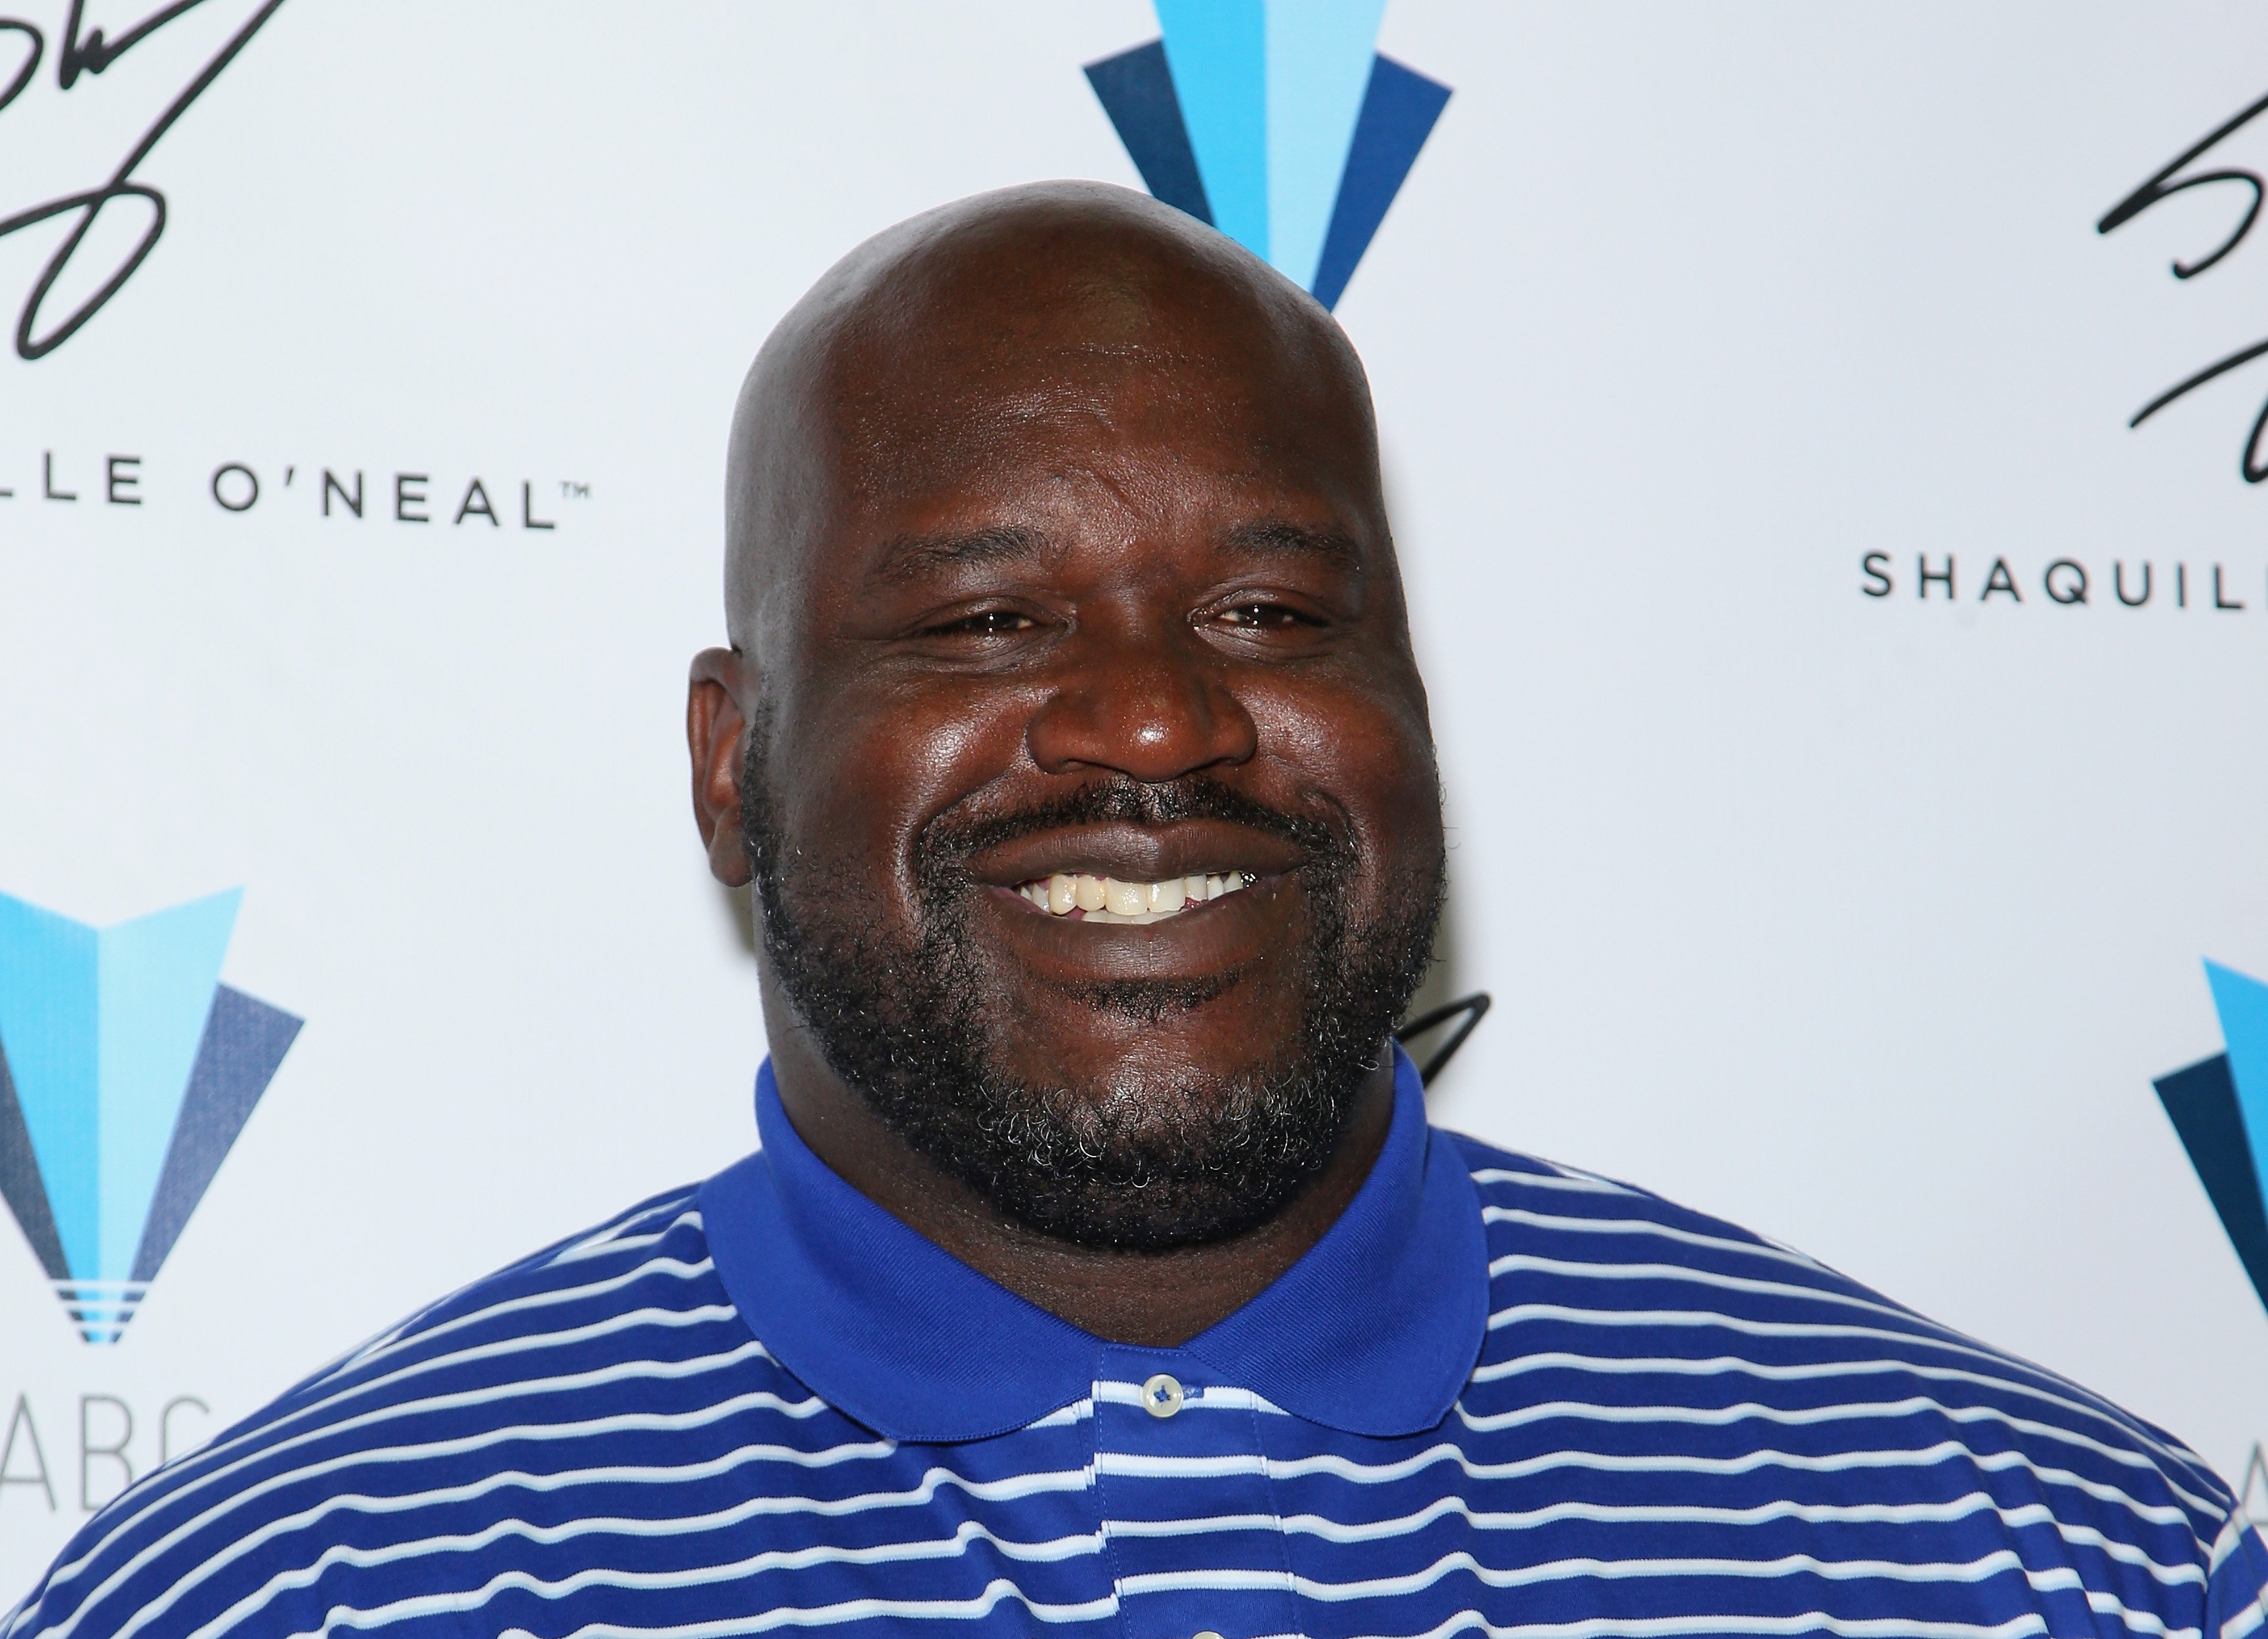 Shaquille O'Neal at the Licensing Expo 2016 at the Mandalay Bay Convention Center on June 21, 2016. | Photo: Getty Images